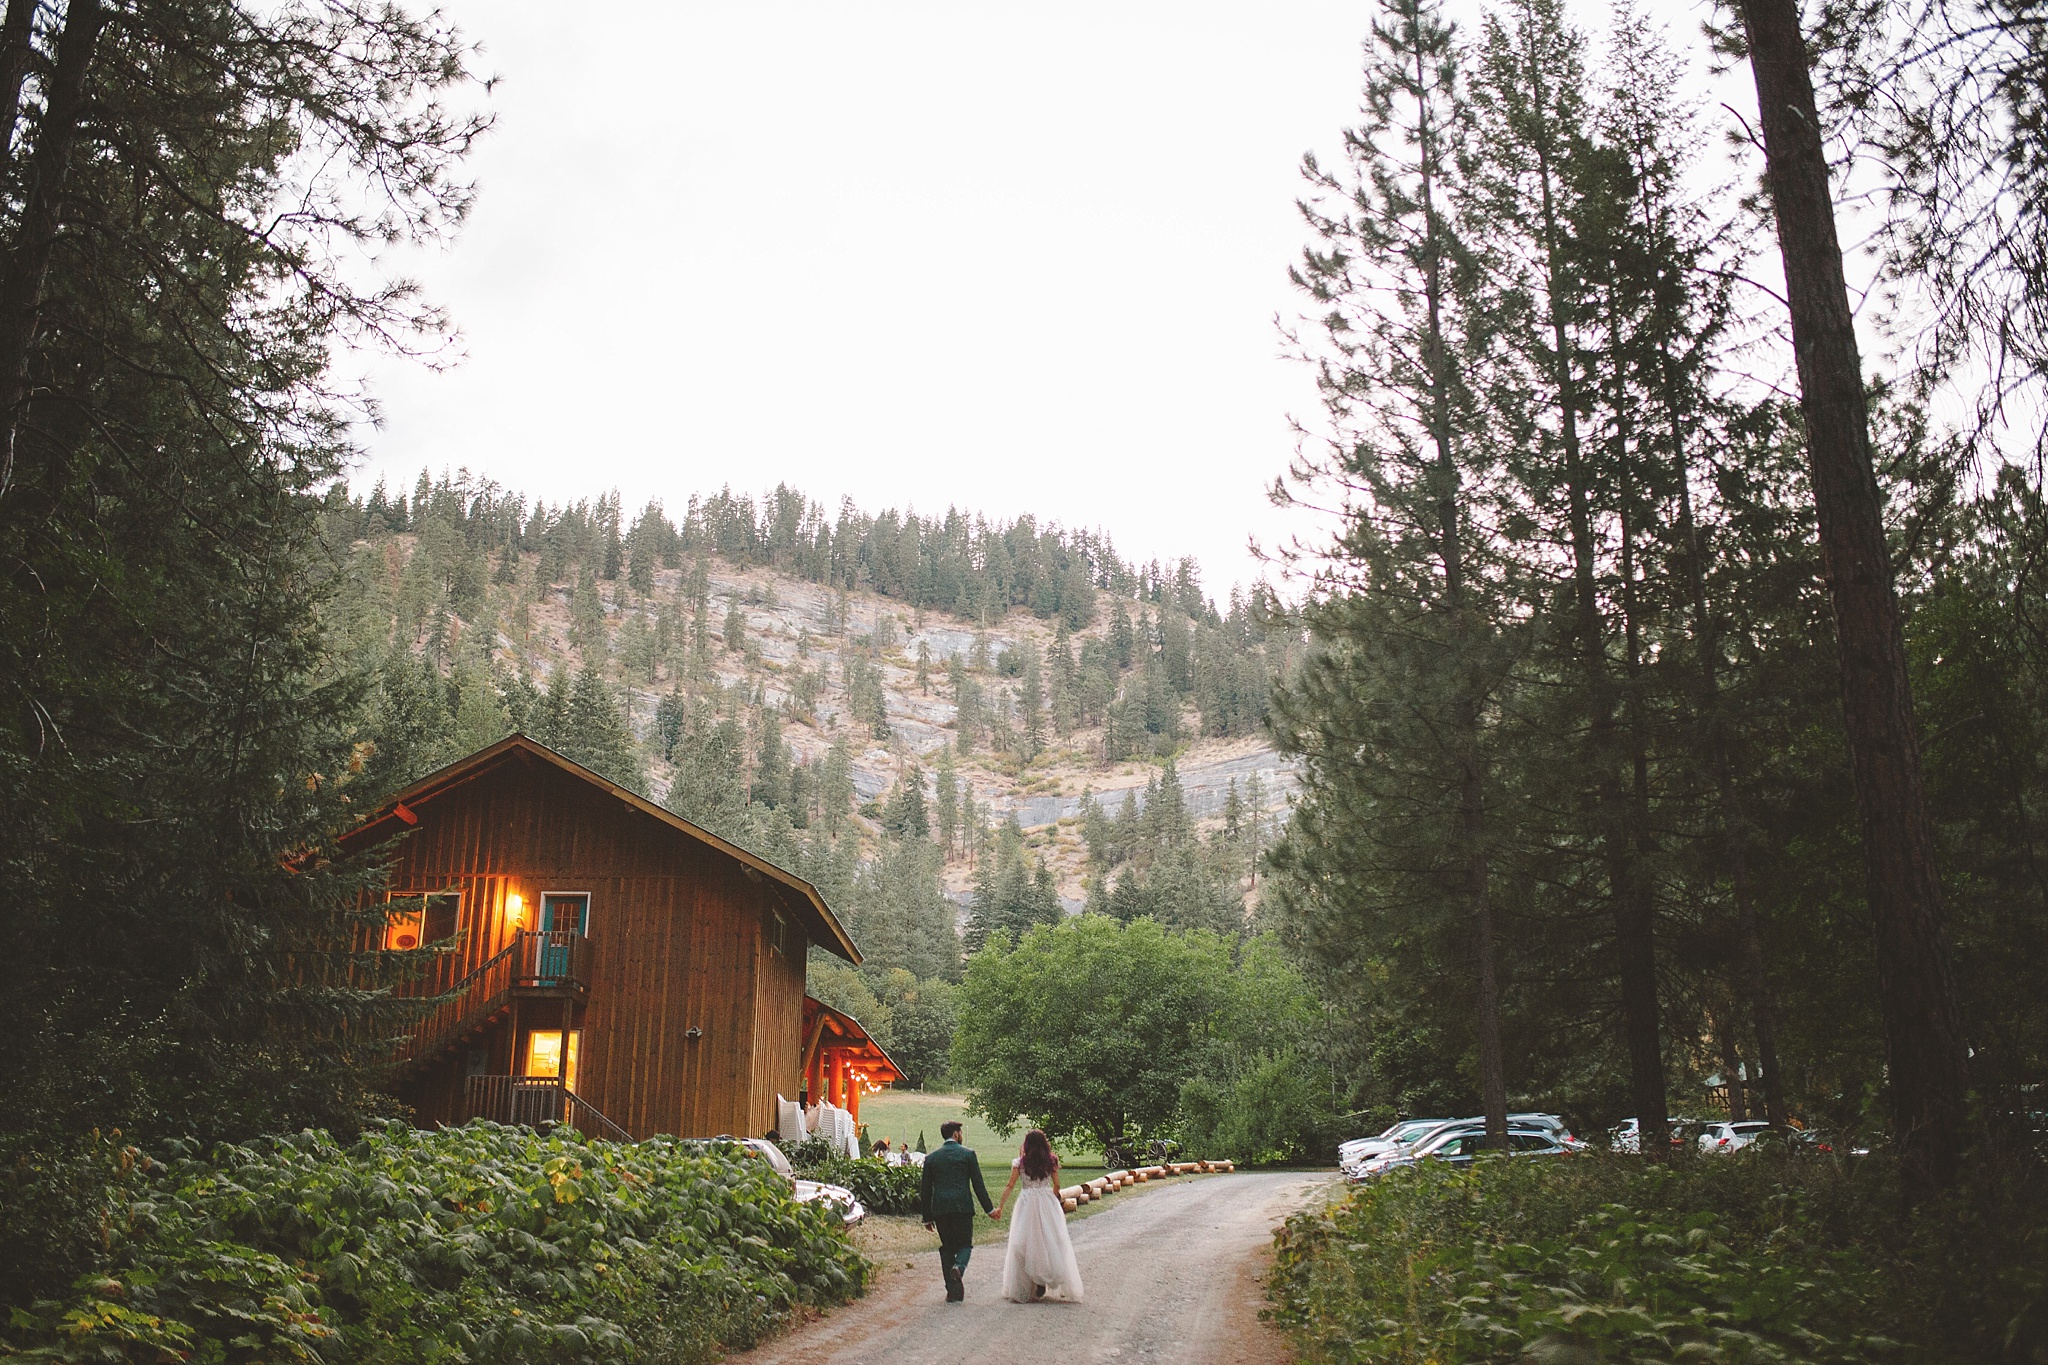 Red Tail canyon farm wedding in the woods of Washington